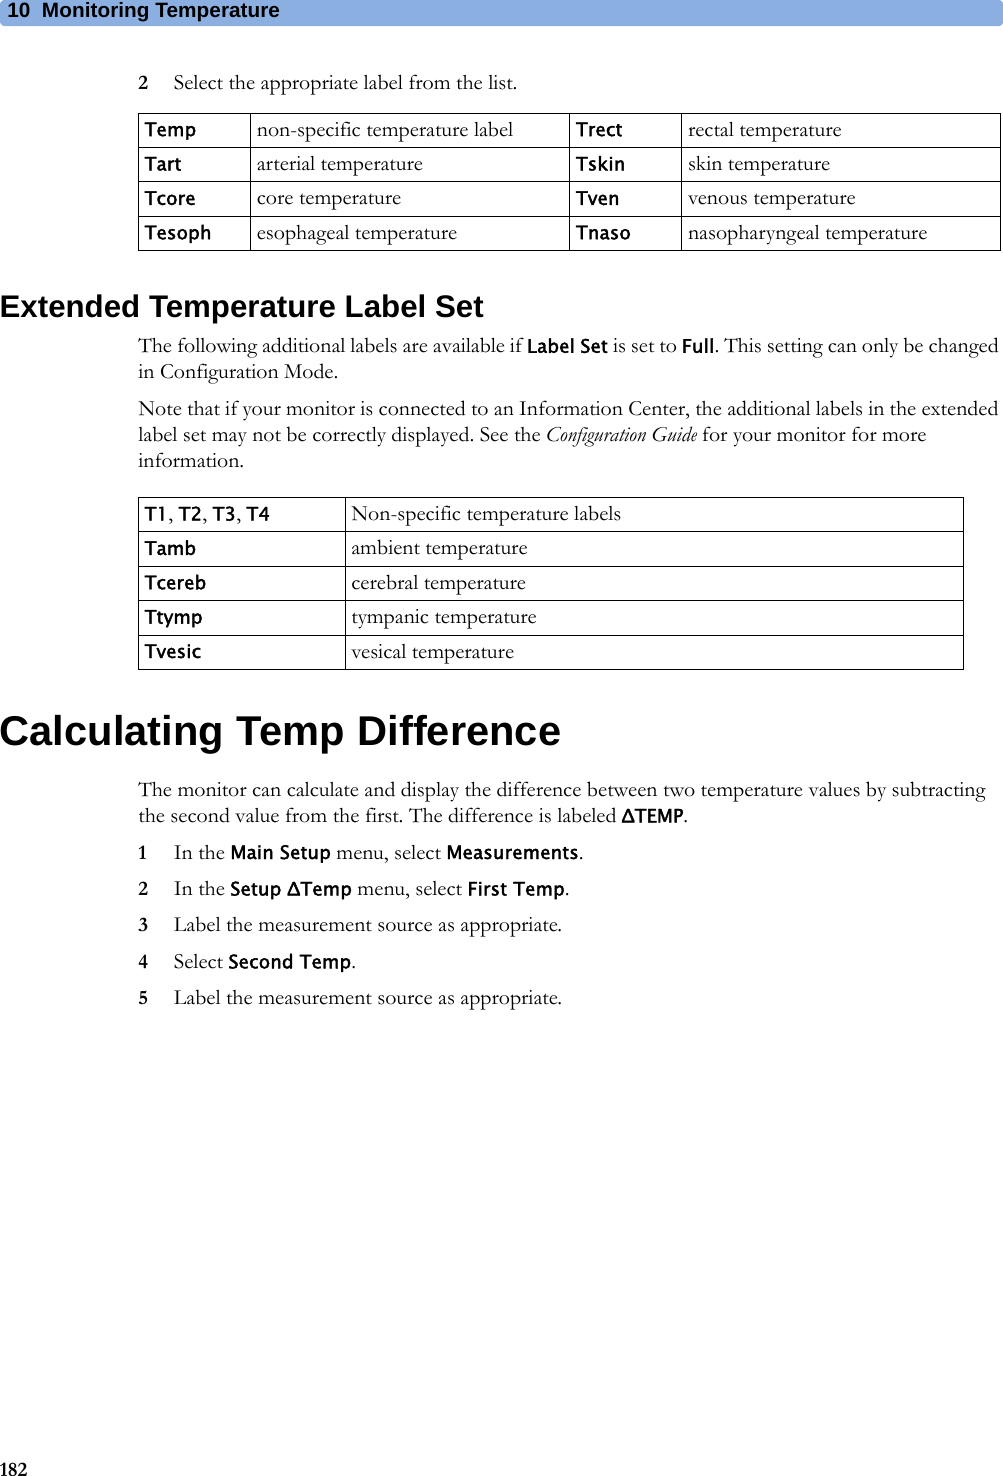 10 Monitoring Temperature1822Select the appropriate label from the list.Extended Temperature Label SetThe following additional labels are available if Label Set is set to Full. This setting can only be changed in Configuration Mode.Note that if your monitor is connected to an Information Center, the additional labels in the extended label set may not be correctly displayed. See the Configuration Guide for your monitor for more information.Calculating Temp DifferenceThe monitor can calculate and display the difference between two temperature values by subtracting the second value from the first. The difference is labeled ΔTEMP.1In the Main Setup menu, select Measurements.2In the Setup ΔTemp menu, select First Temp.3Label the measurement source as appropriate.4Select Second Temp.5Label the measurement source as appropriate.Temp non-specific temperature label Trect rectal temperatureTart arterial temperature Tskin skin temperatureTcore core temperature Tven venous temperatureTesoph esophageal temperature Tnaso nasopharyngeal temperatureT1, T2, T3, T4 Non-specific temperature labelsTamb ambient temperatureTcereb cerebral temperatureTtymp tympanic temperatureTvesic vesical temperature